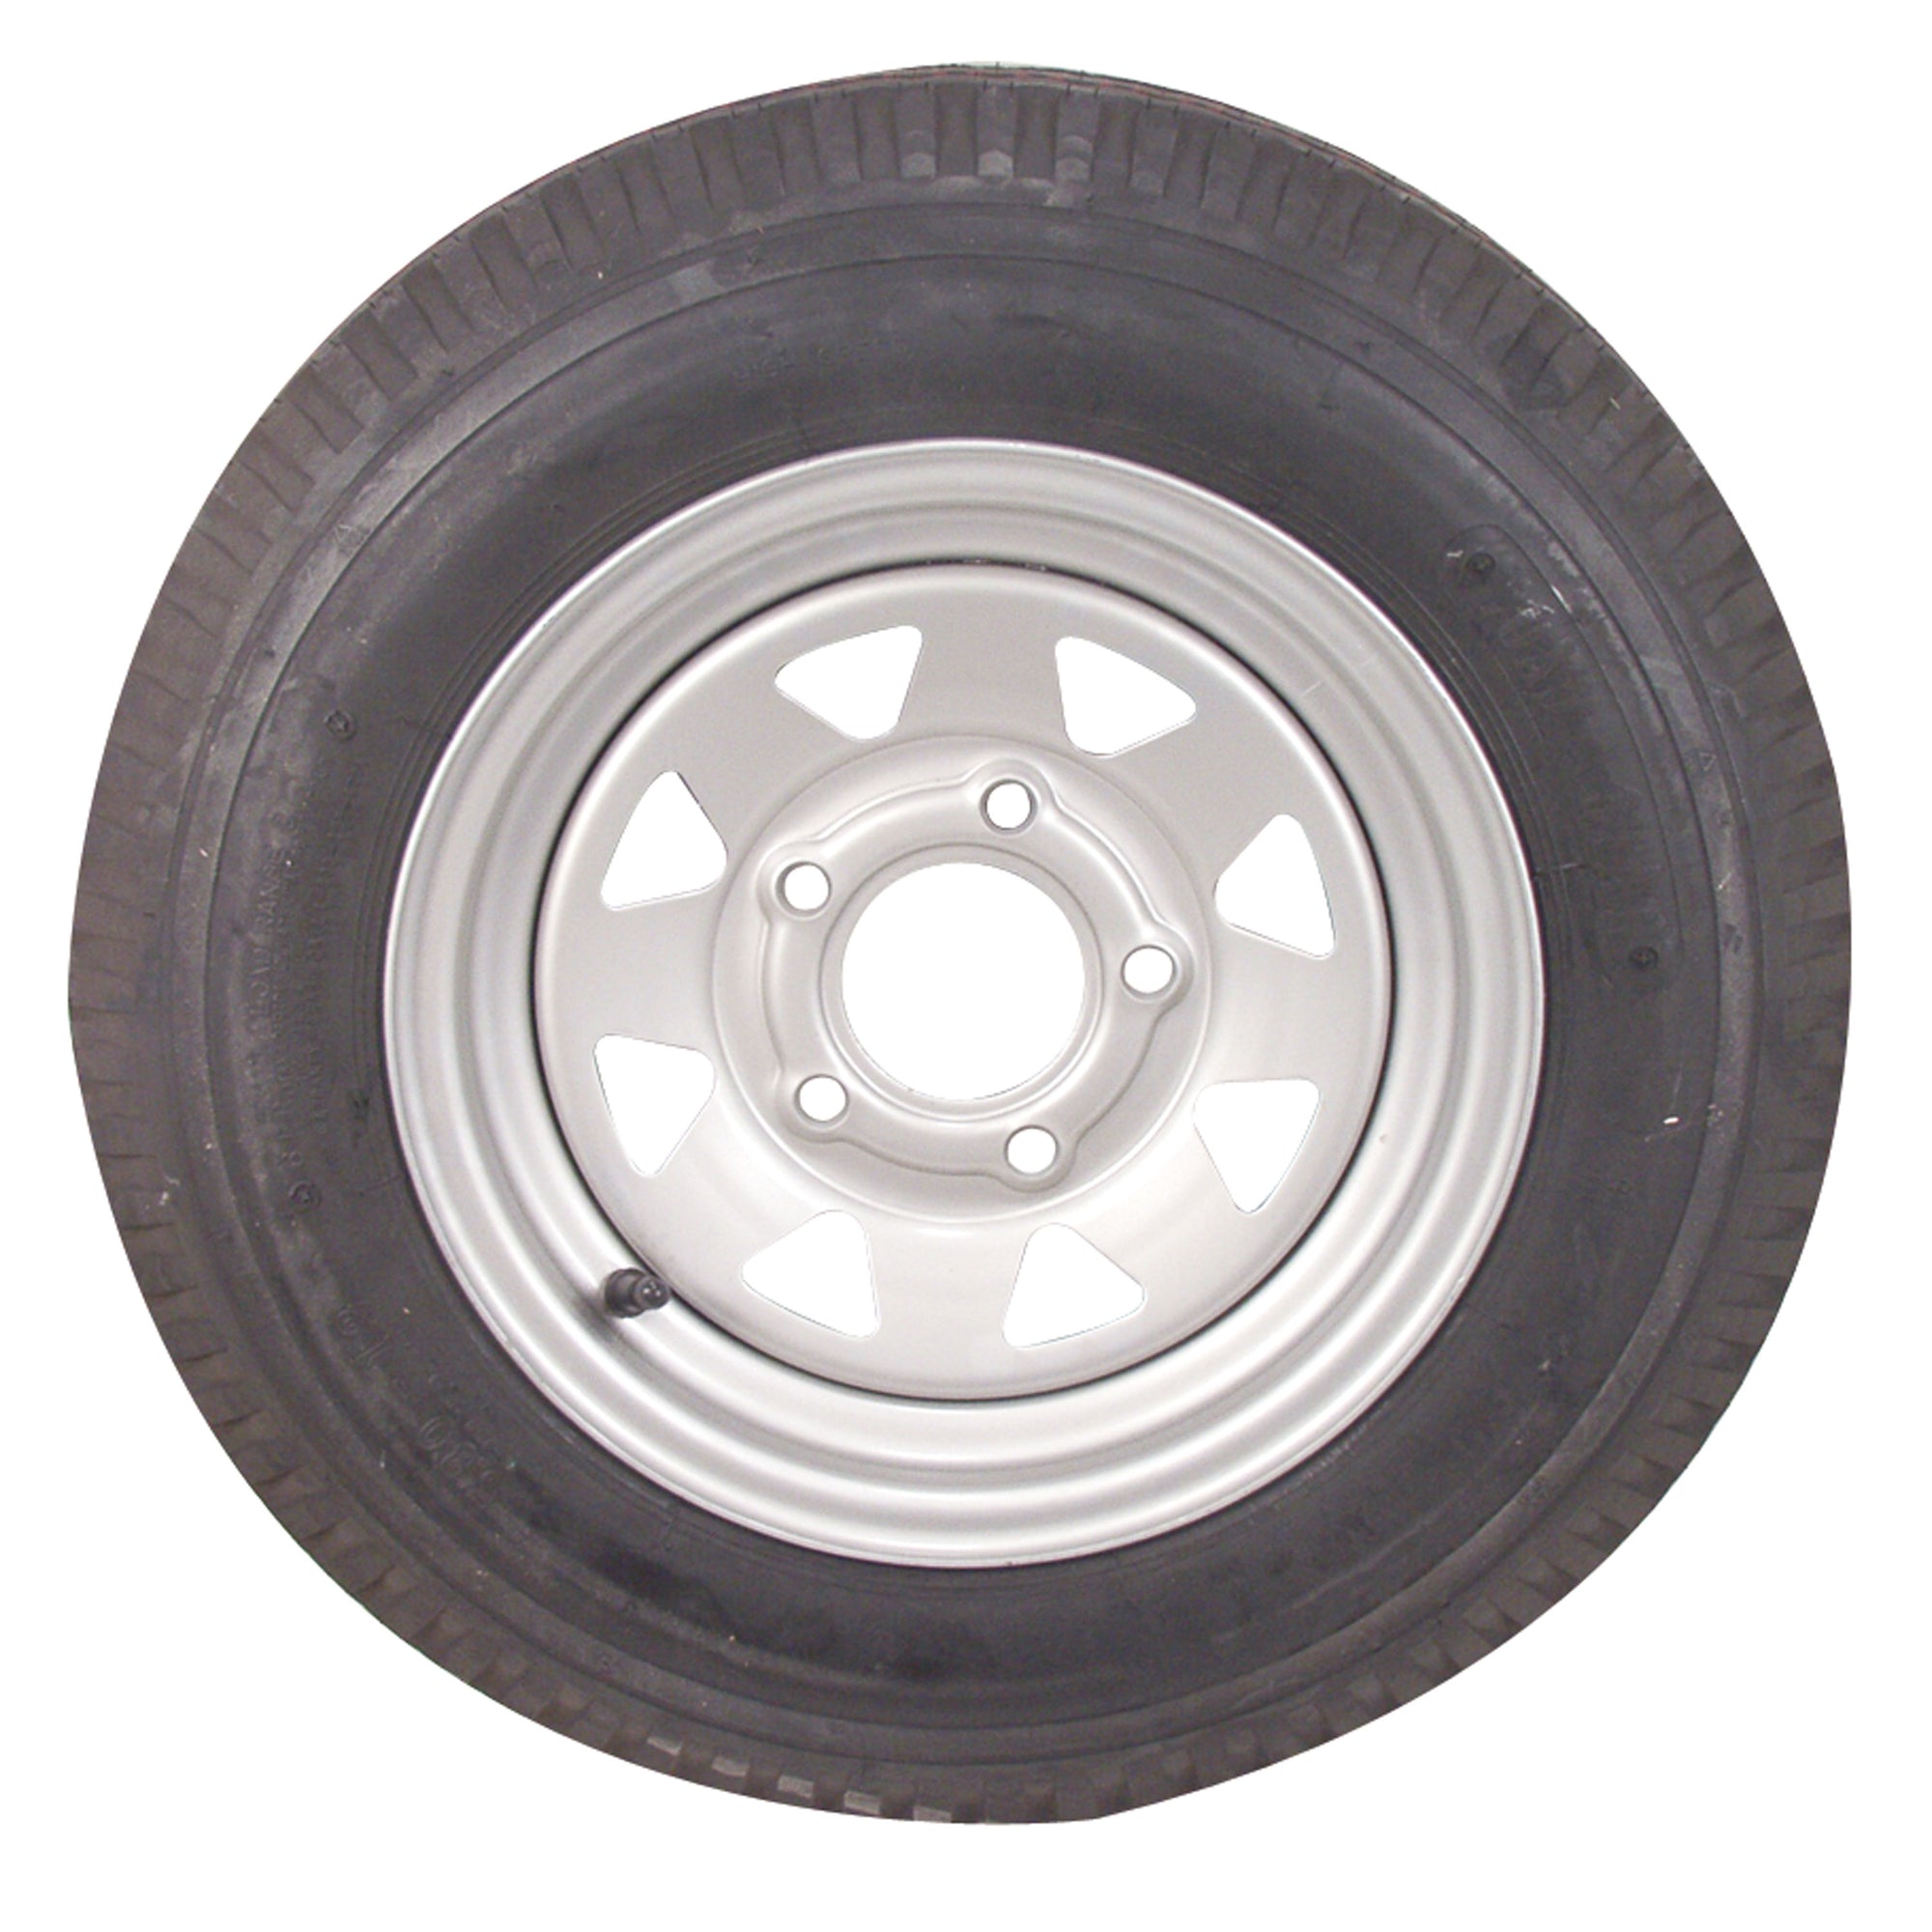 Americana Tire and Wheel 3S335 Economy Bias Tire and Wheel ST185/80D13 D/5-Hole - Painted Silver Spoke Rim